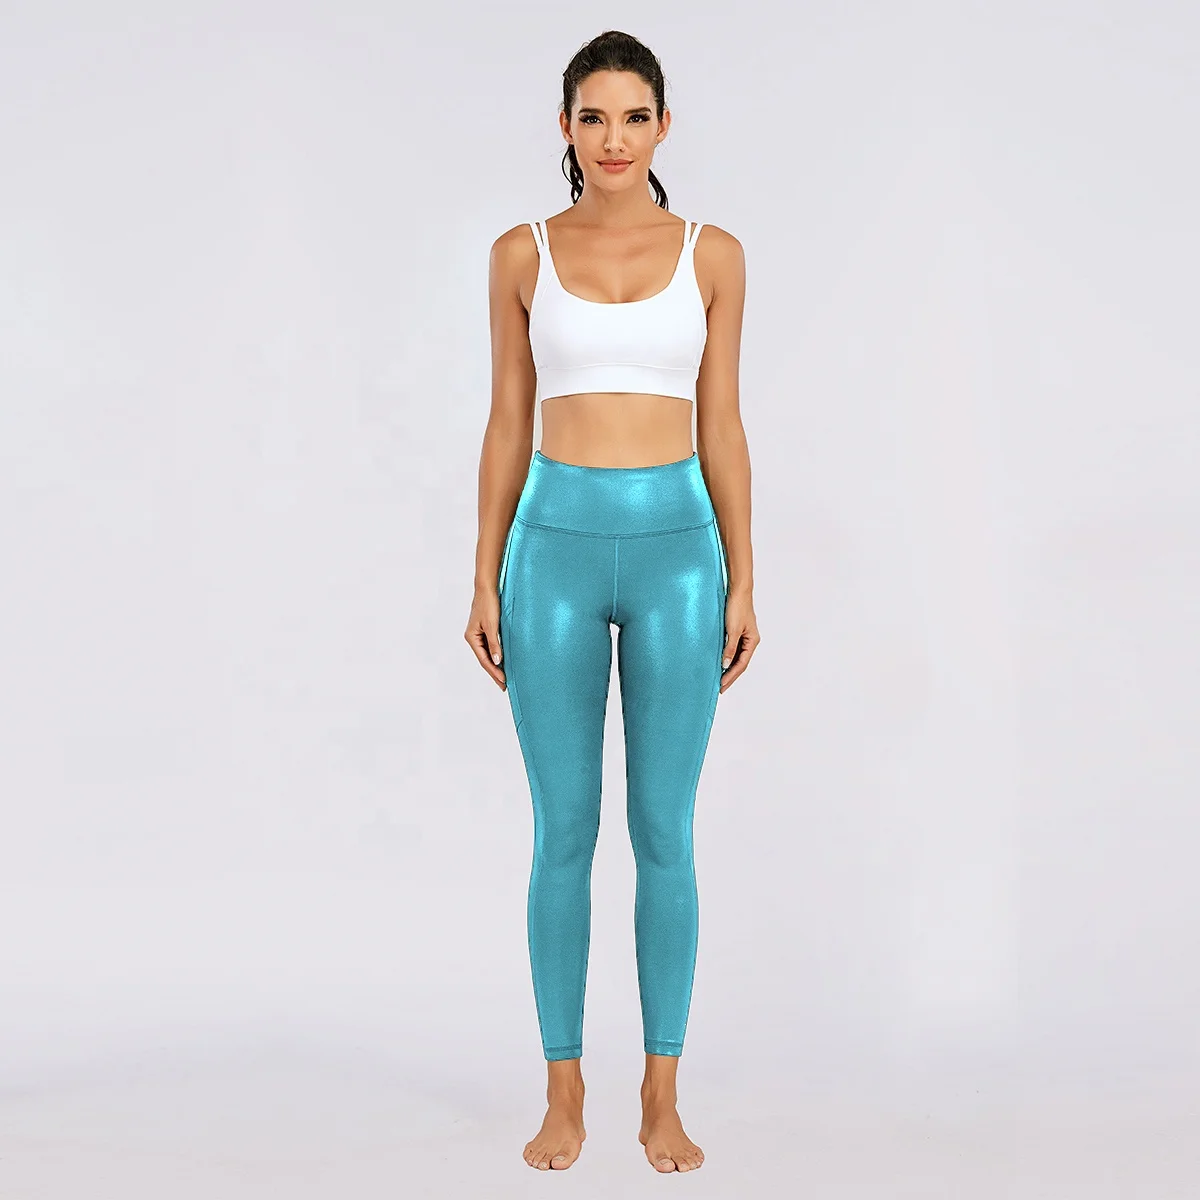 Be Fit Blue Shiny Bra Top - Be Fit Apparel